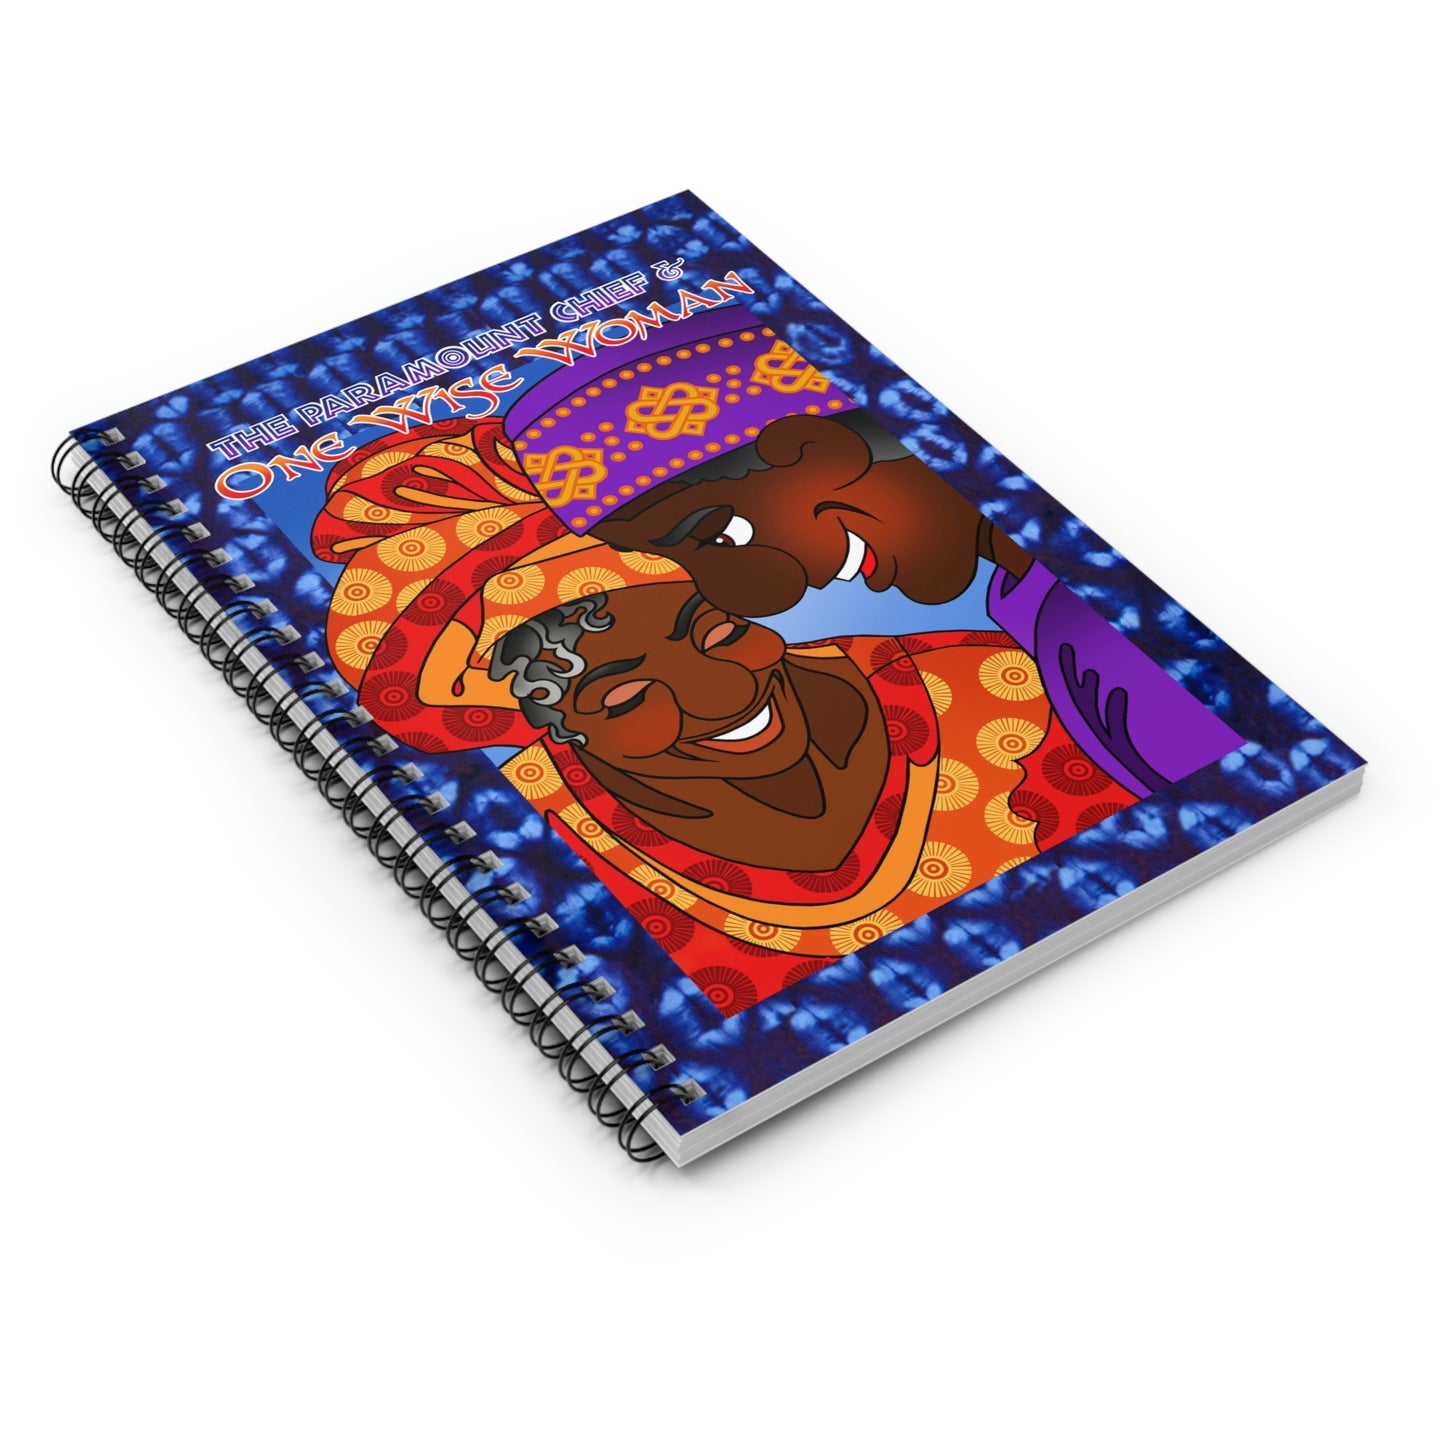 The Paramount Chief and One Wise Woman Spiral Notebook - Ruled Line